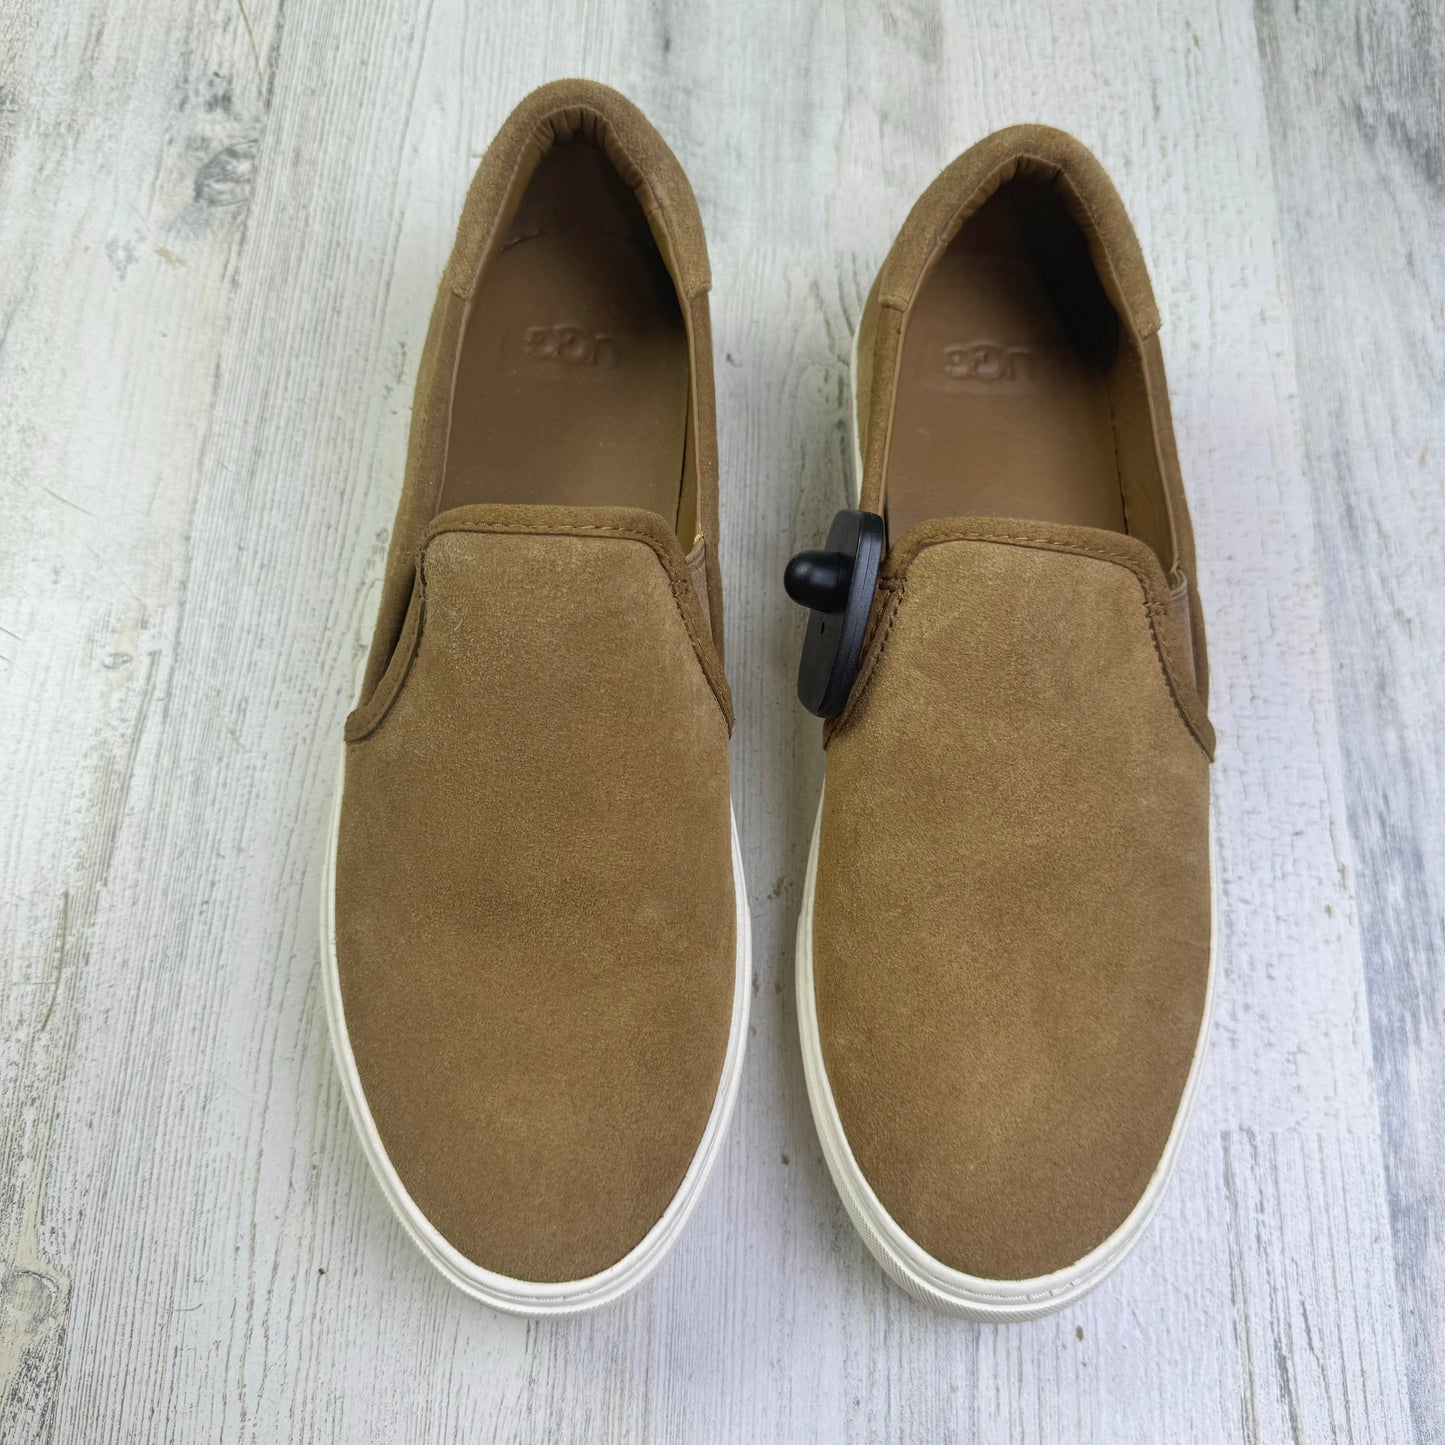 Brown Shoes Flats Ugg, Size 9